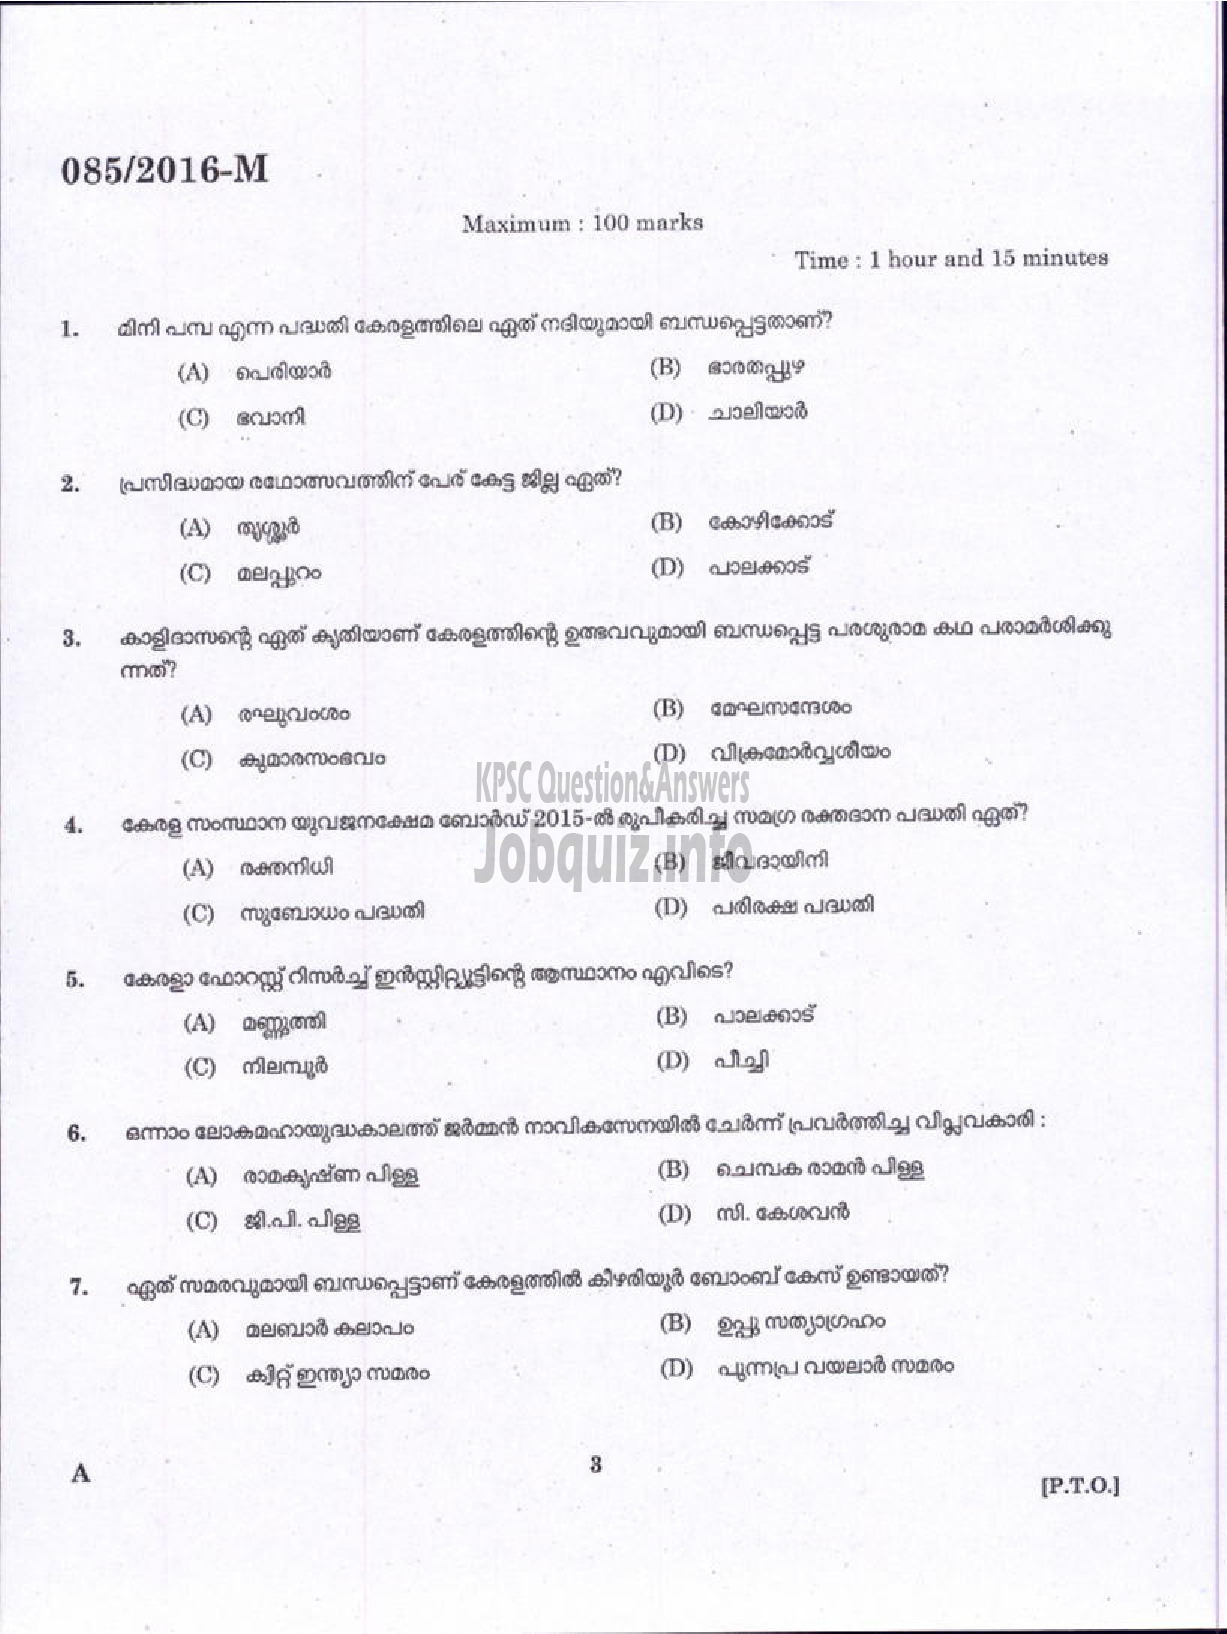 Kerala PSC Question Paper - POLICE CONSTABLE POLICE INDIA RESERVE BATTALION REGULAR WING ( Malayalam ) -1